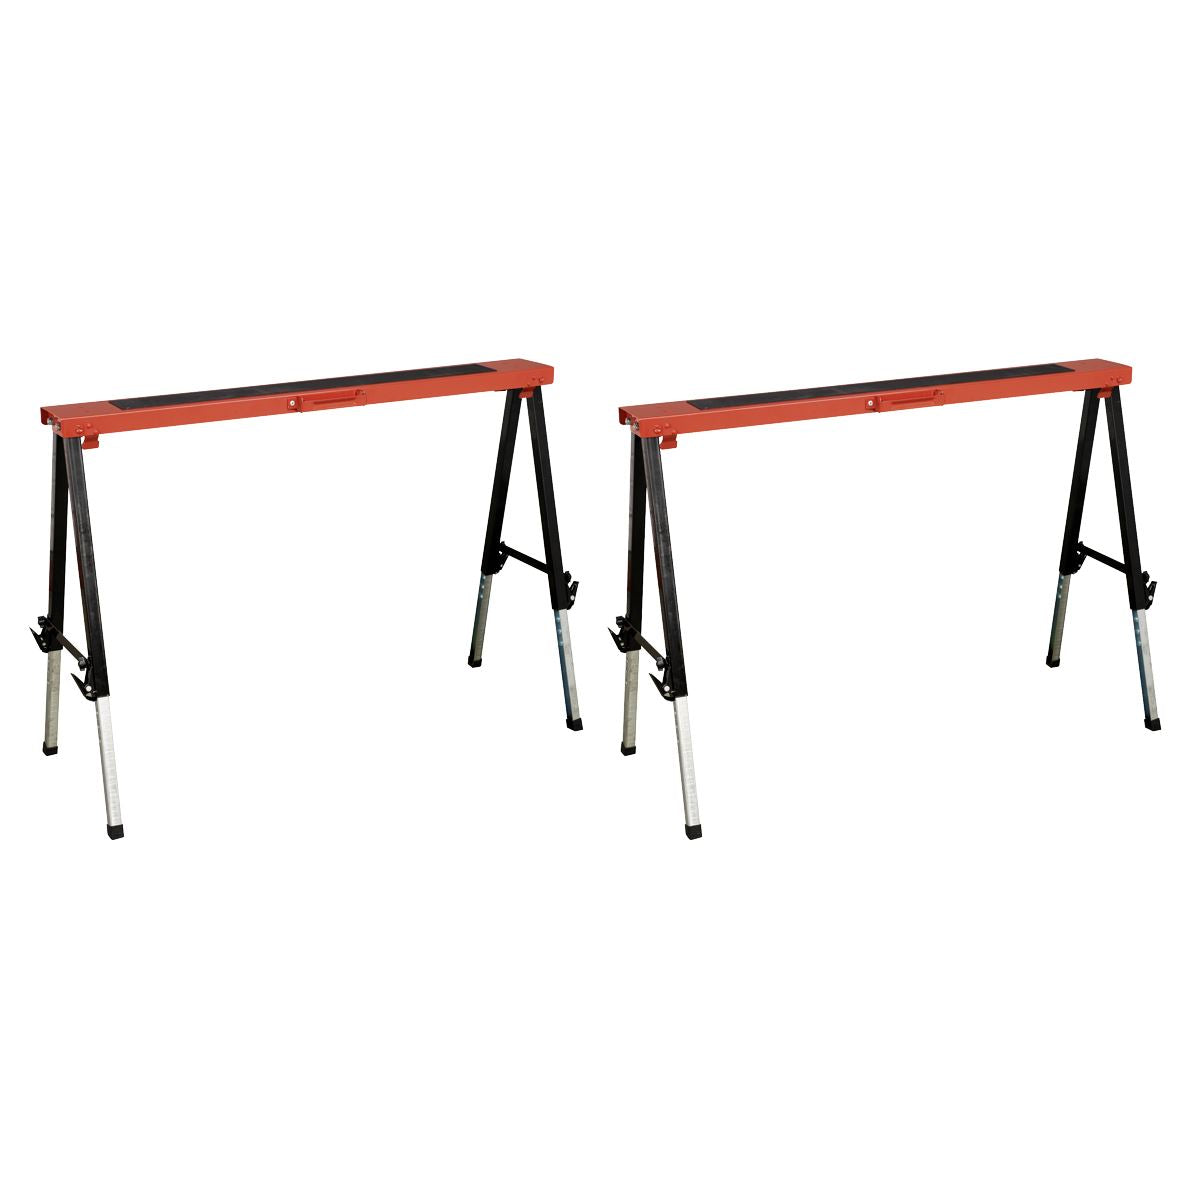 Sealey Fold Down Trestle with Adjustable Legs - Pair